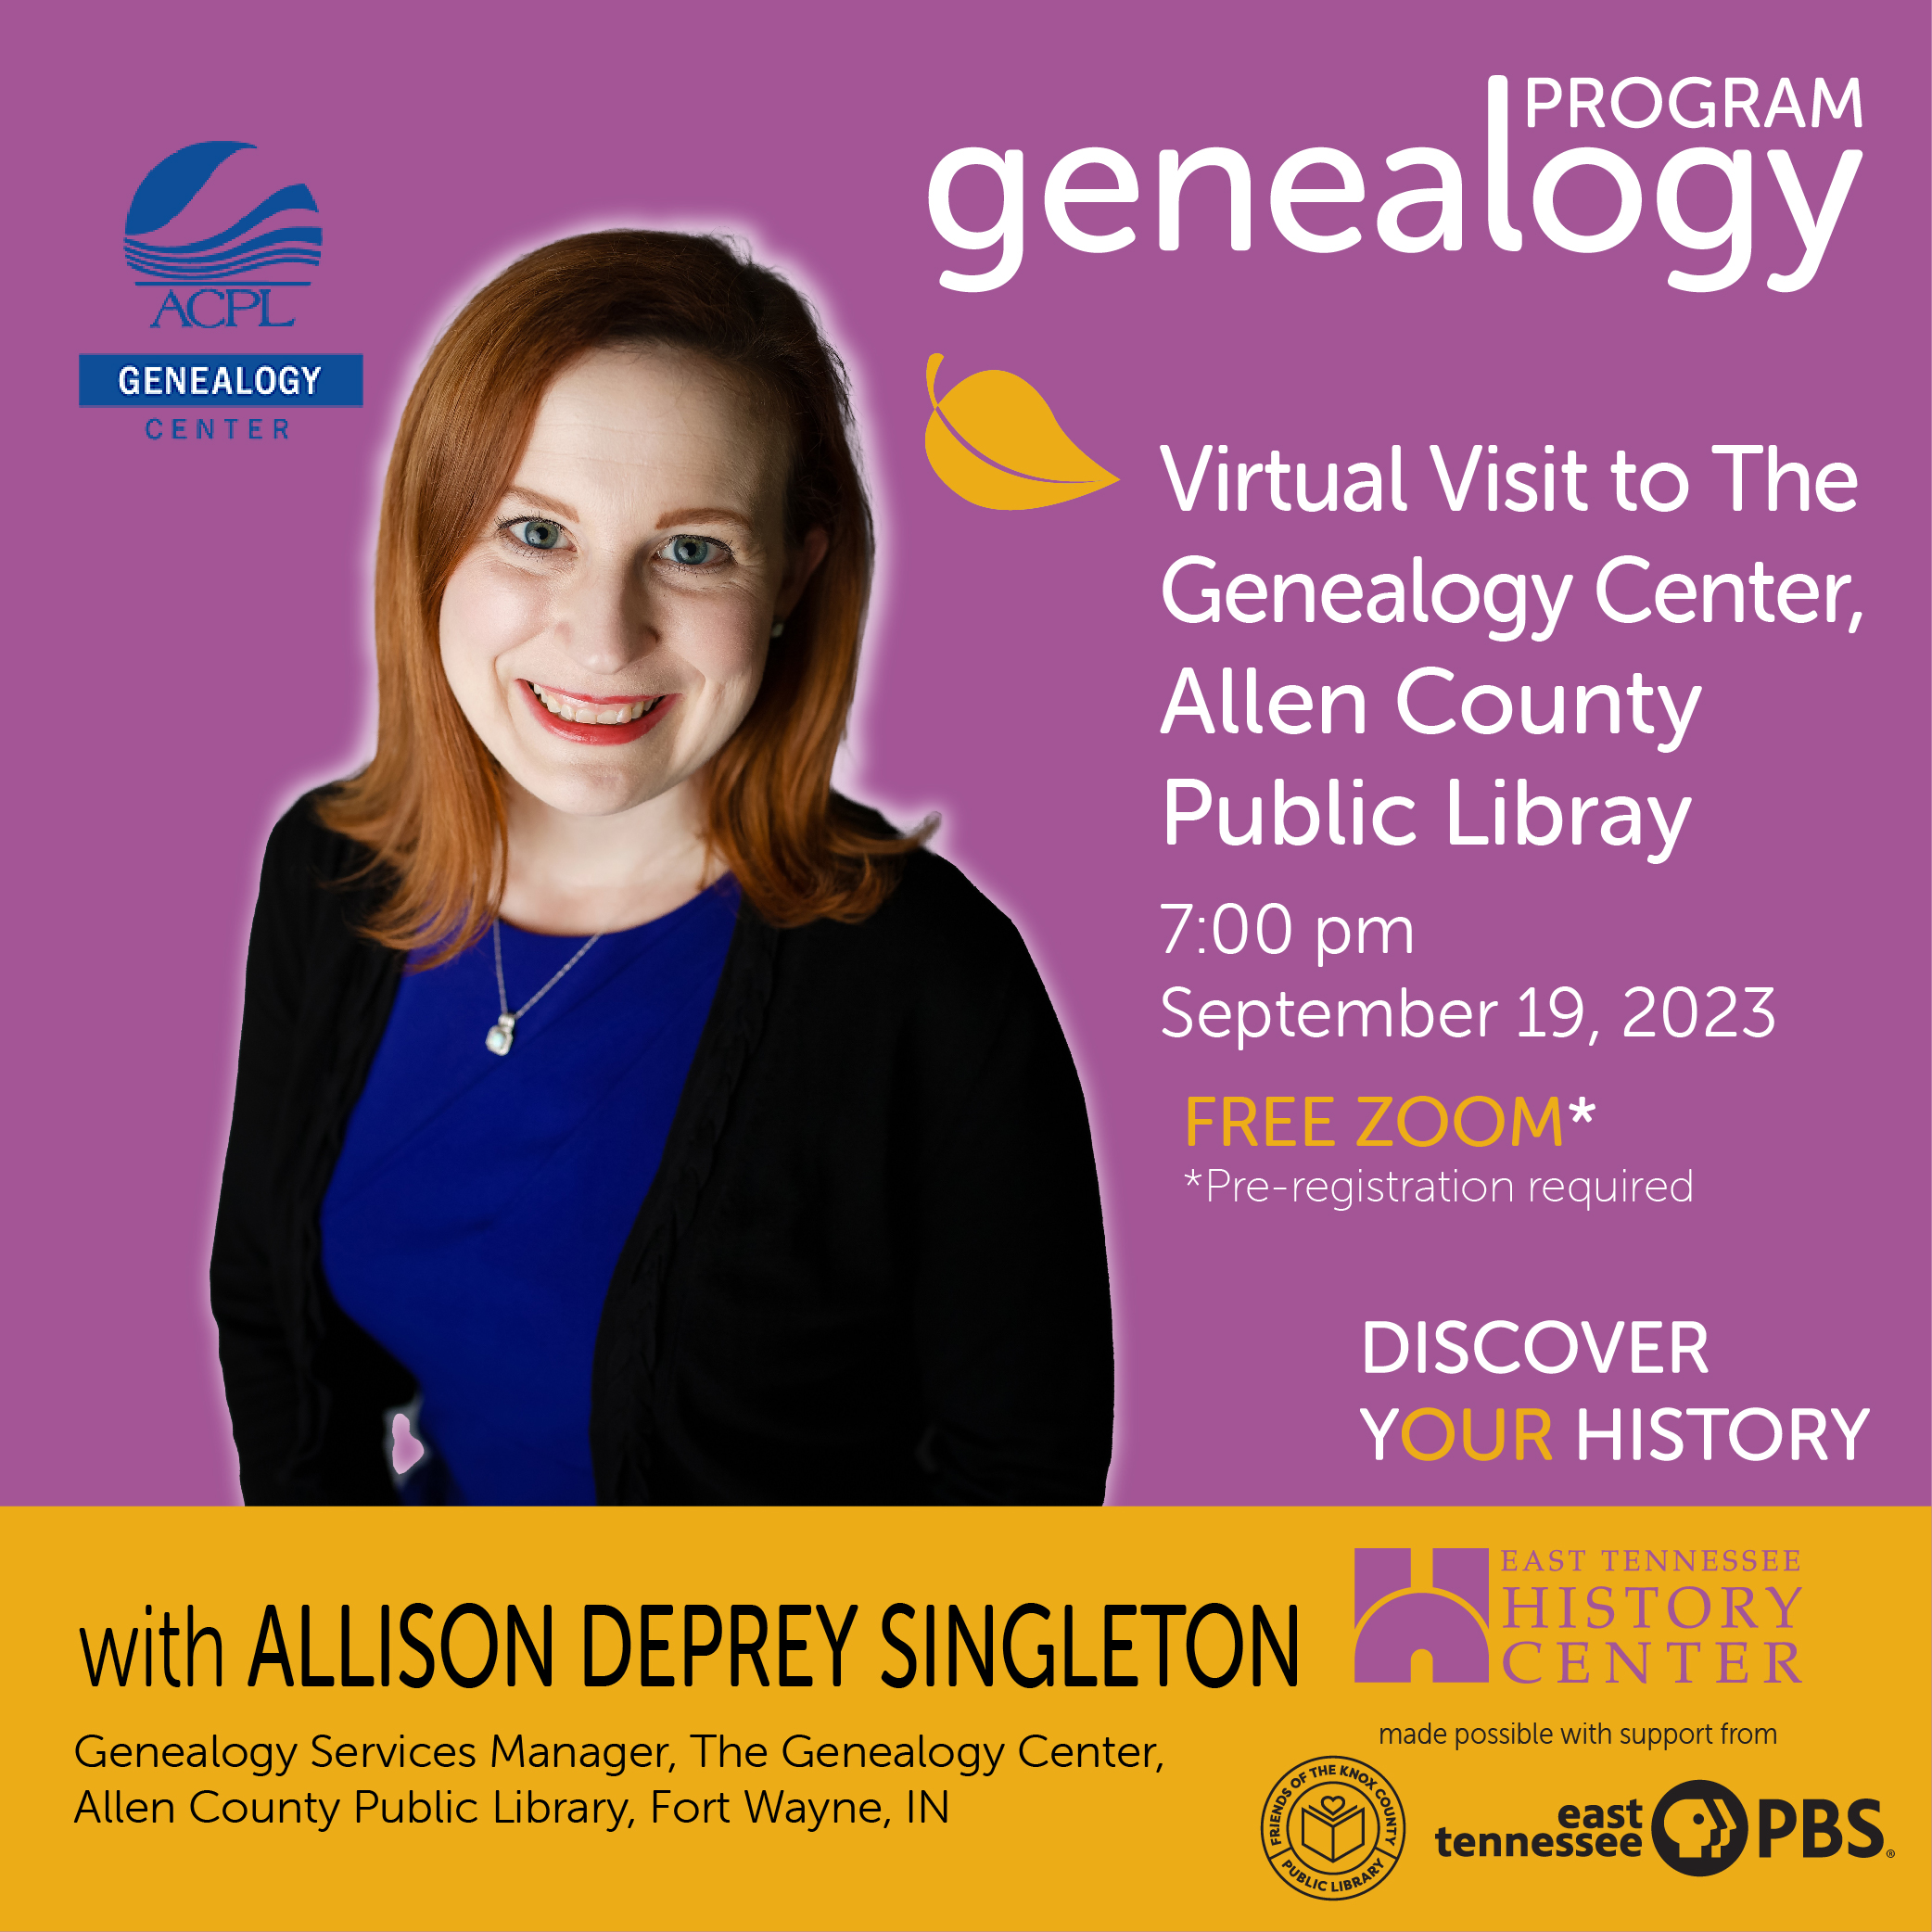 Virtual Visit to The Genealogy Center at Allen County Public Library